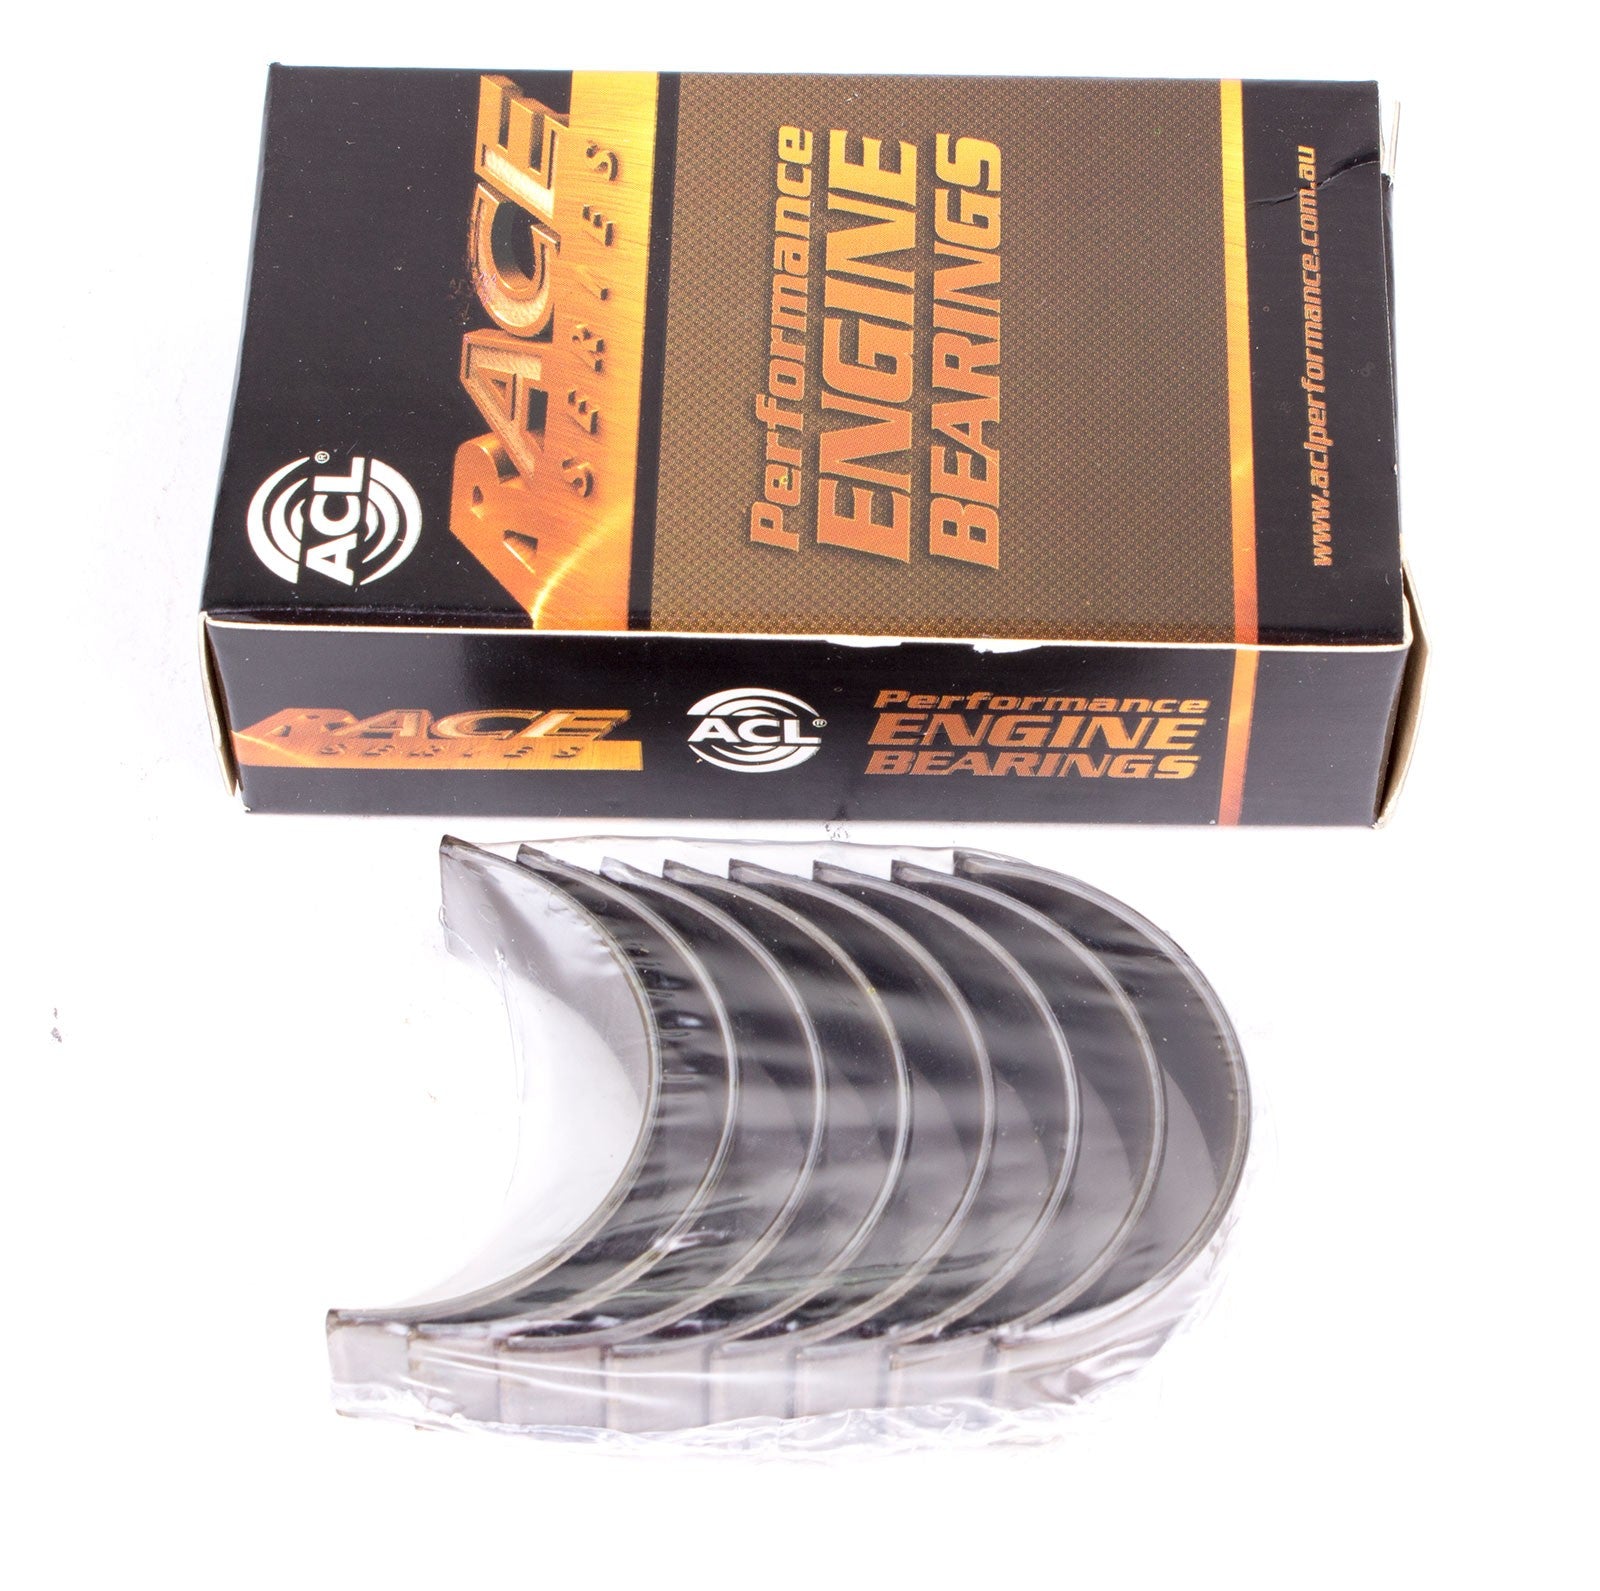 ACL 5M909H-10 Main bearing set (ACL Race Series) Photo-0 